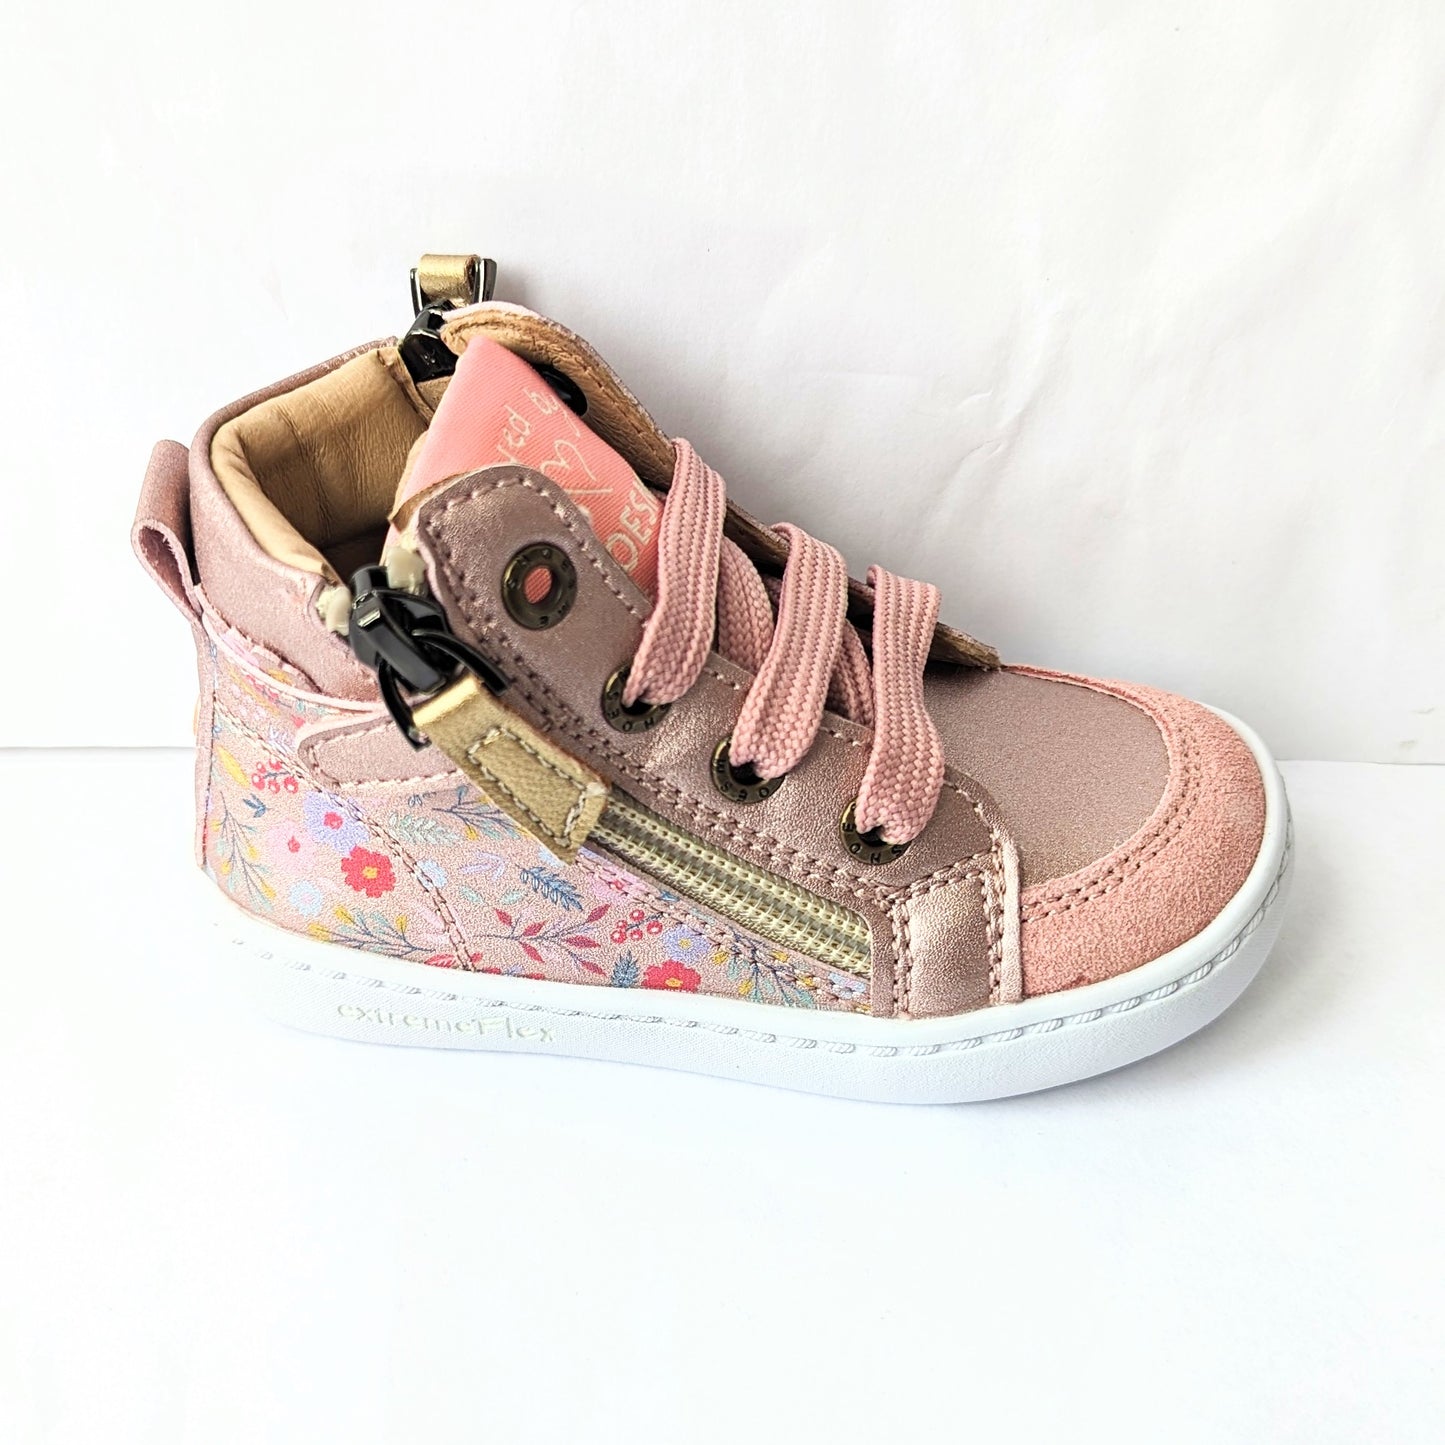 A girls hi-top boot by Shoesme, style FL23W008-B, in rose gold floral leather and suede with detachable teddy bear and lace and zip fastening. Right side view.